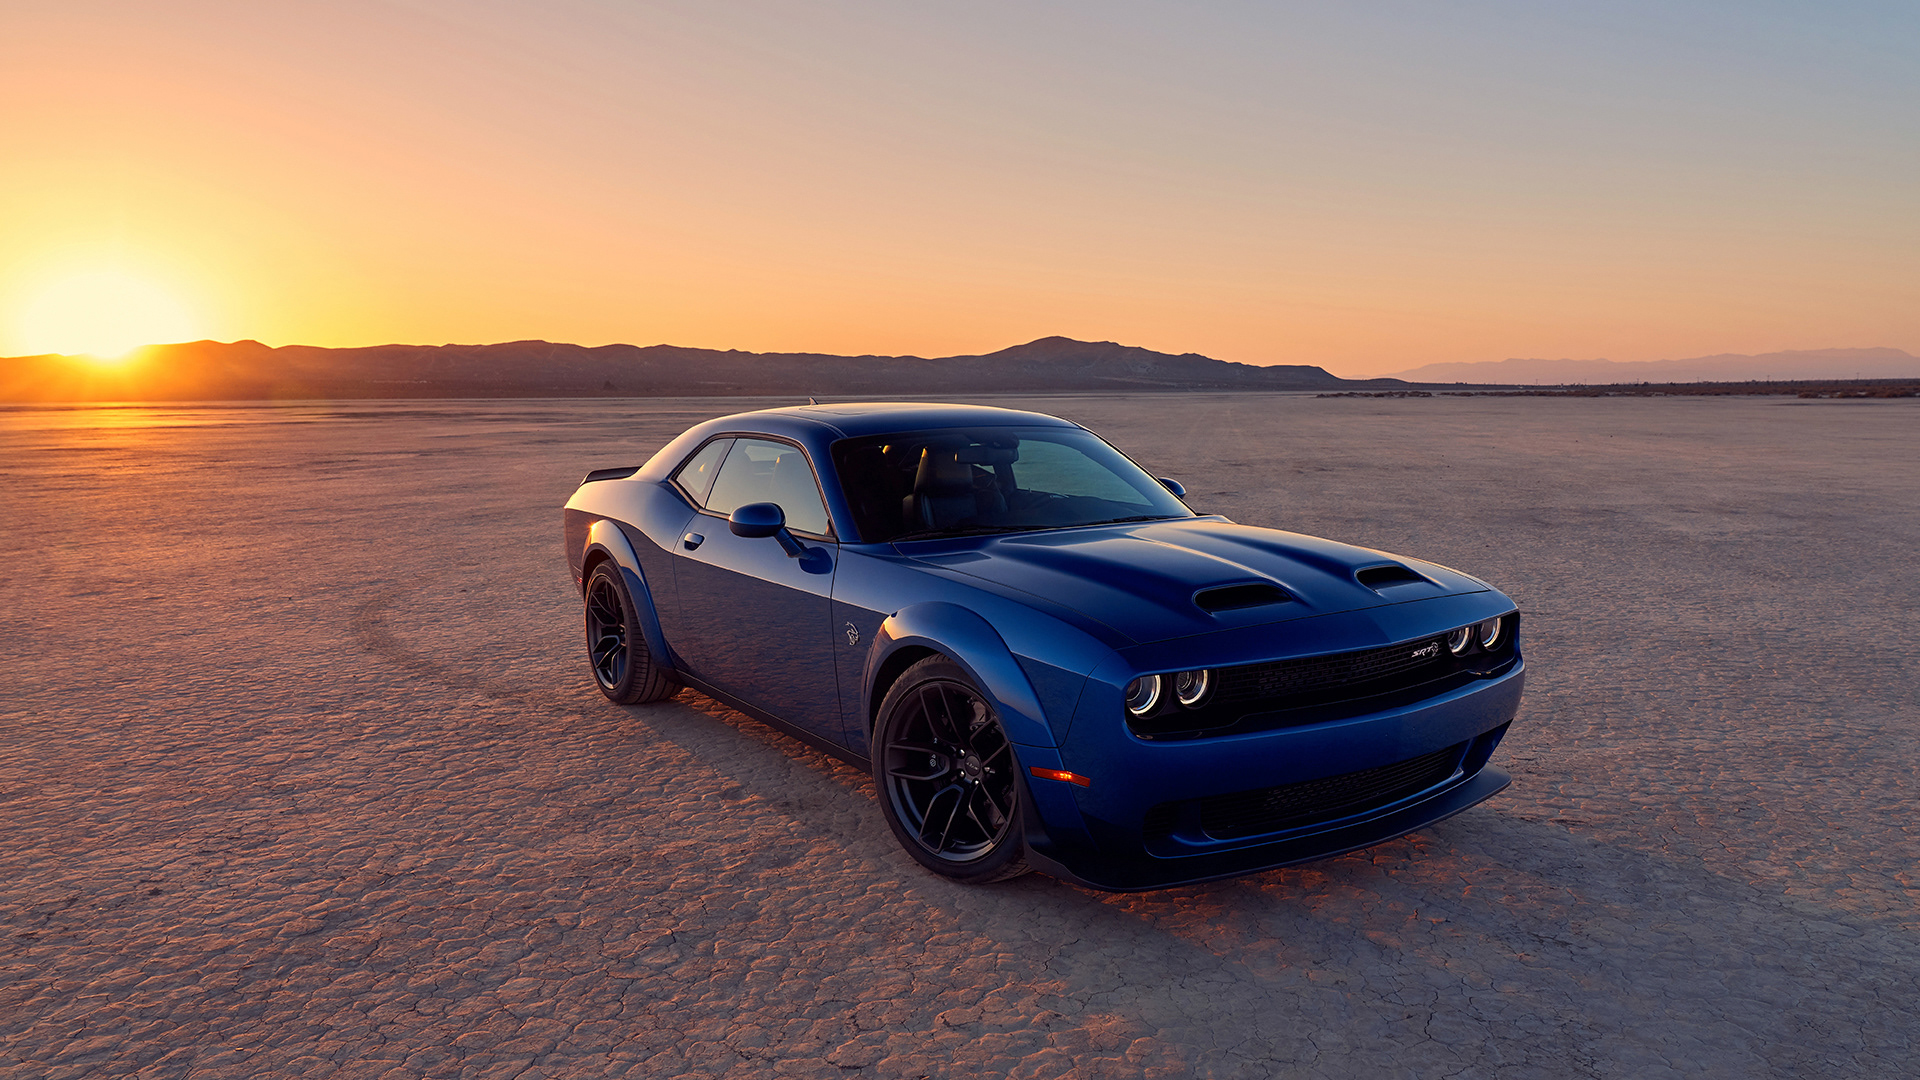 General 1920x1080 car Dodge Dodge Challenger blue cars desert sunset frontal view sunlight outdoors vehicle muscle cars American cars Stellantis